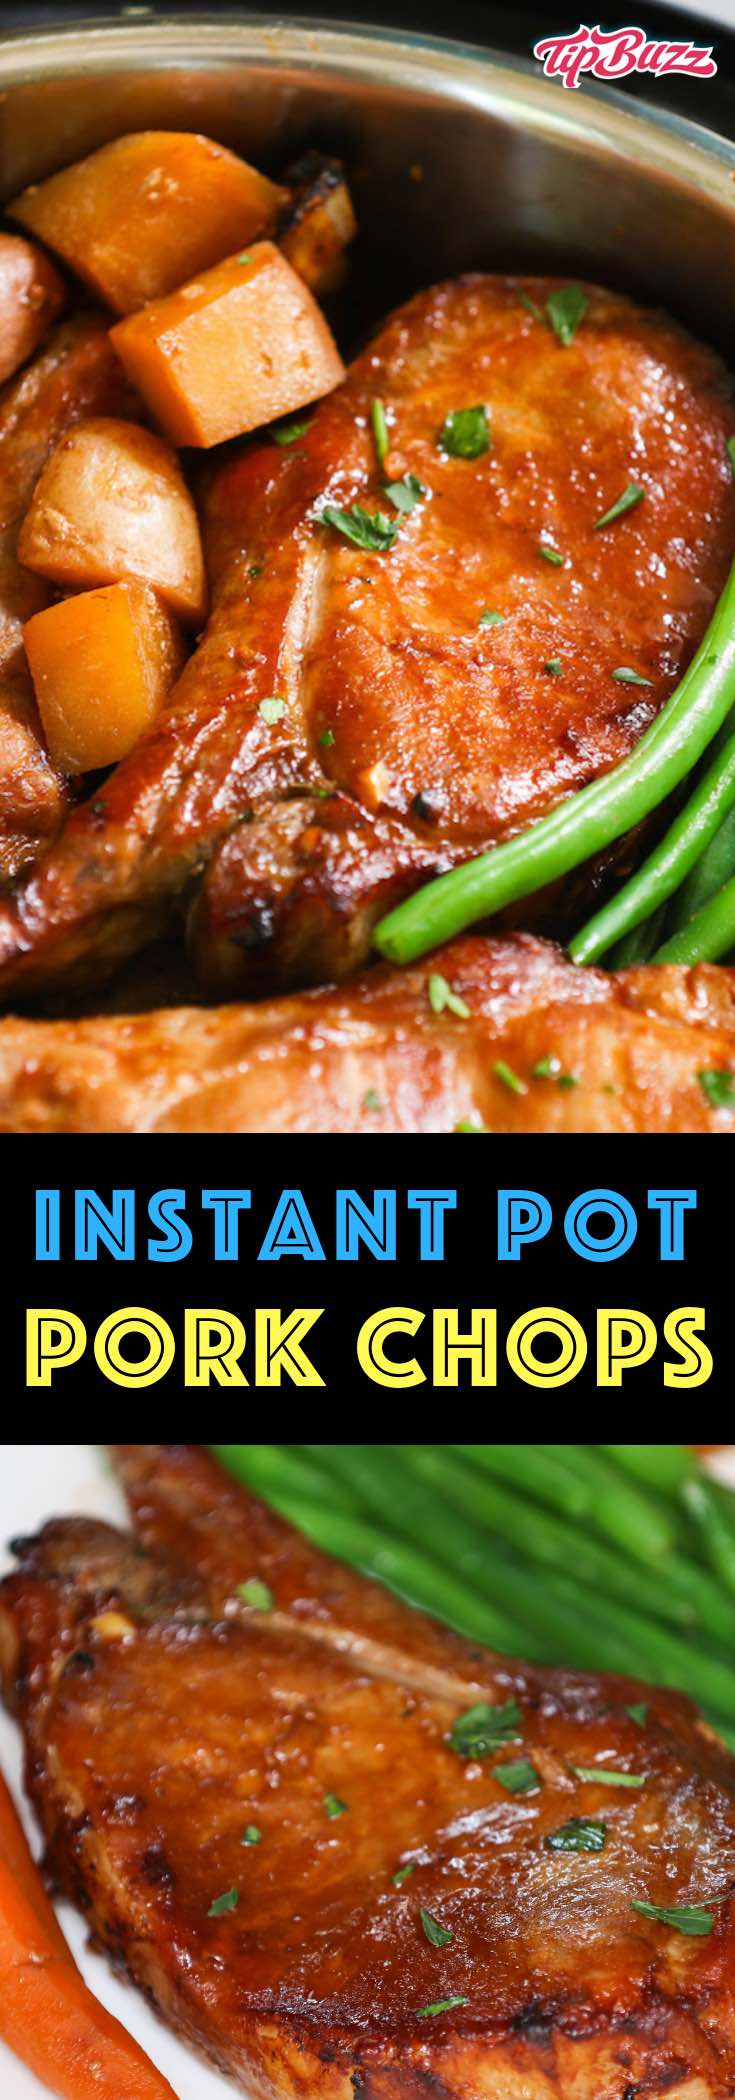 Instant Pot Pork Chops are juicy and full of flavor – they are pressure cooker pork chops perfectly cooked in under 30 minutes from fresh or frozen. This easy instant pot recipe is great for busy weeknights.